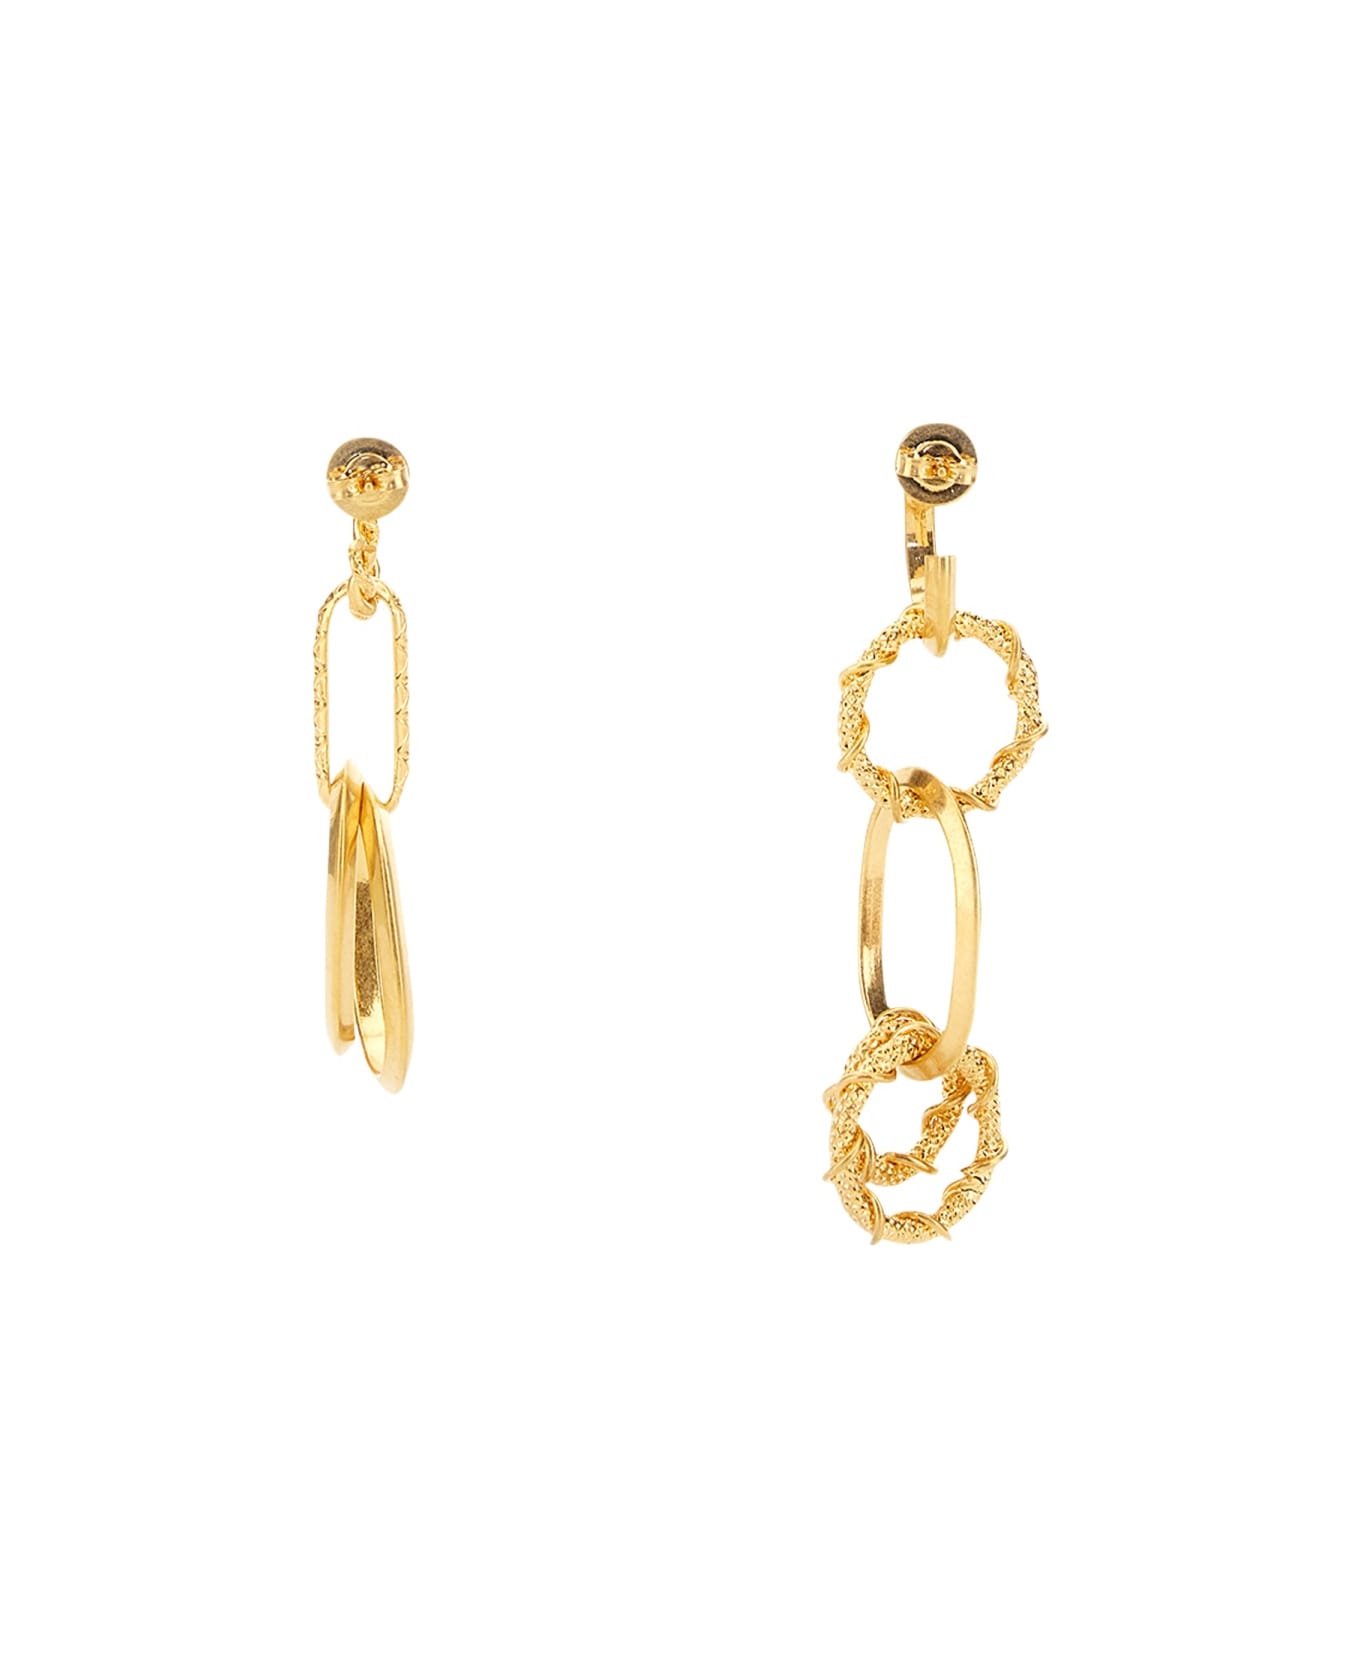 Dsquared2 Earring With Chain Rings - GOLD イヤリング